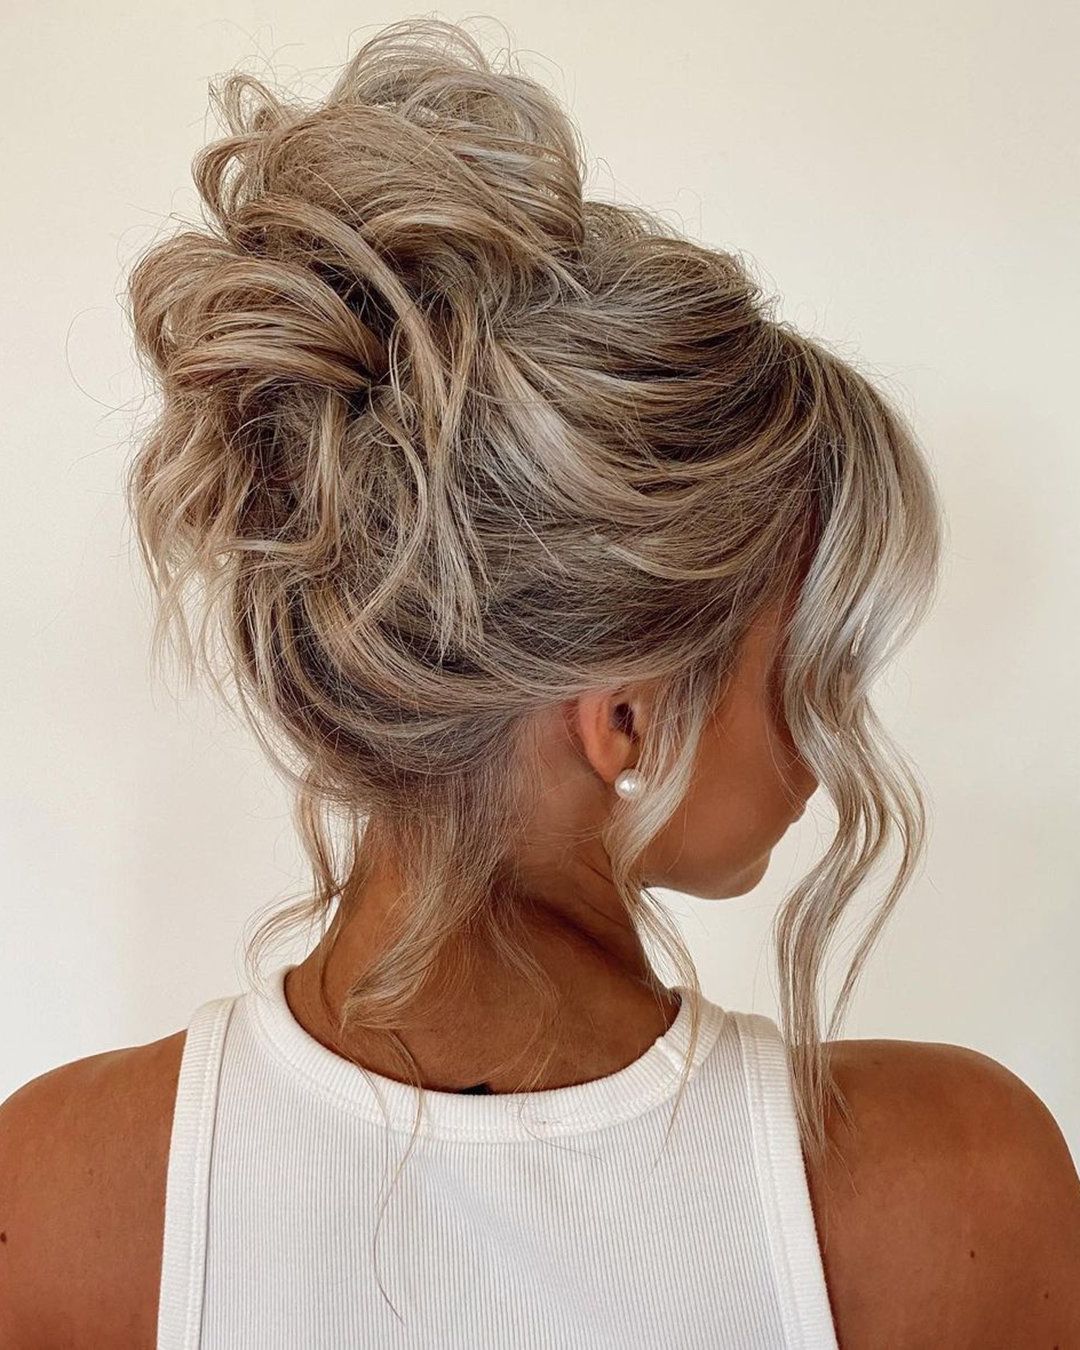 Well Liked Medium Hair Updos Hairstyles With Wedding Hairstyles For Medium Length Hair: 40+ Best Looks (View 20 of 20)